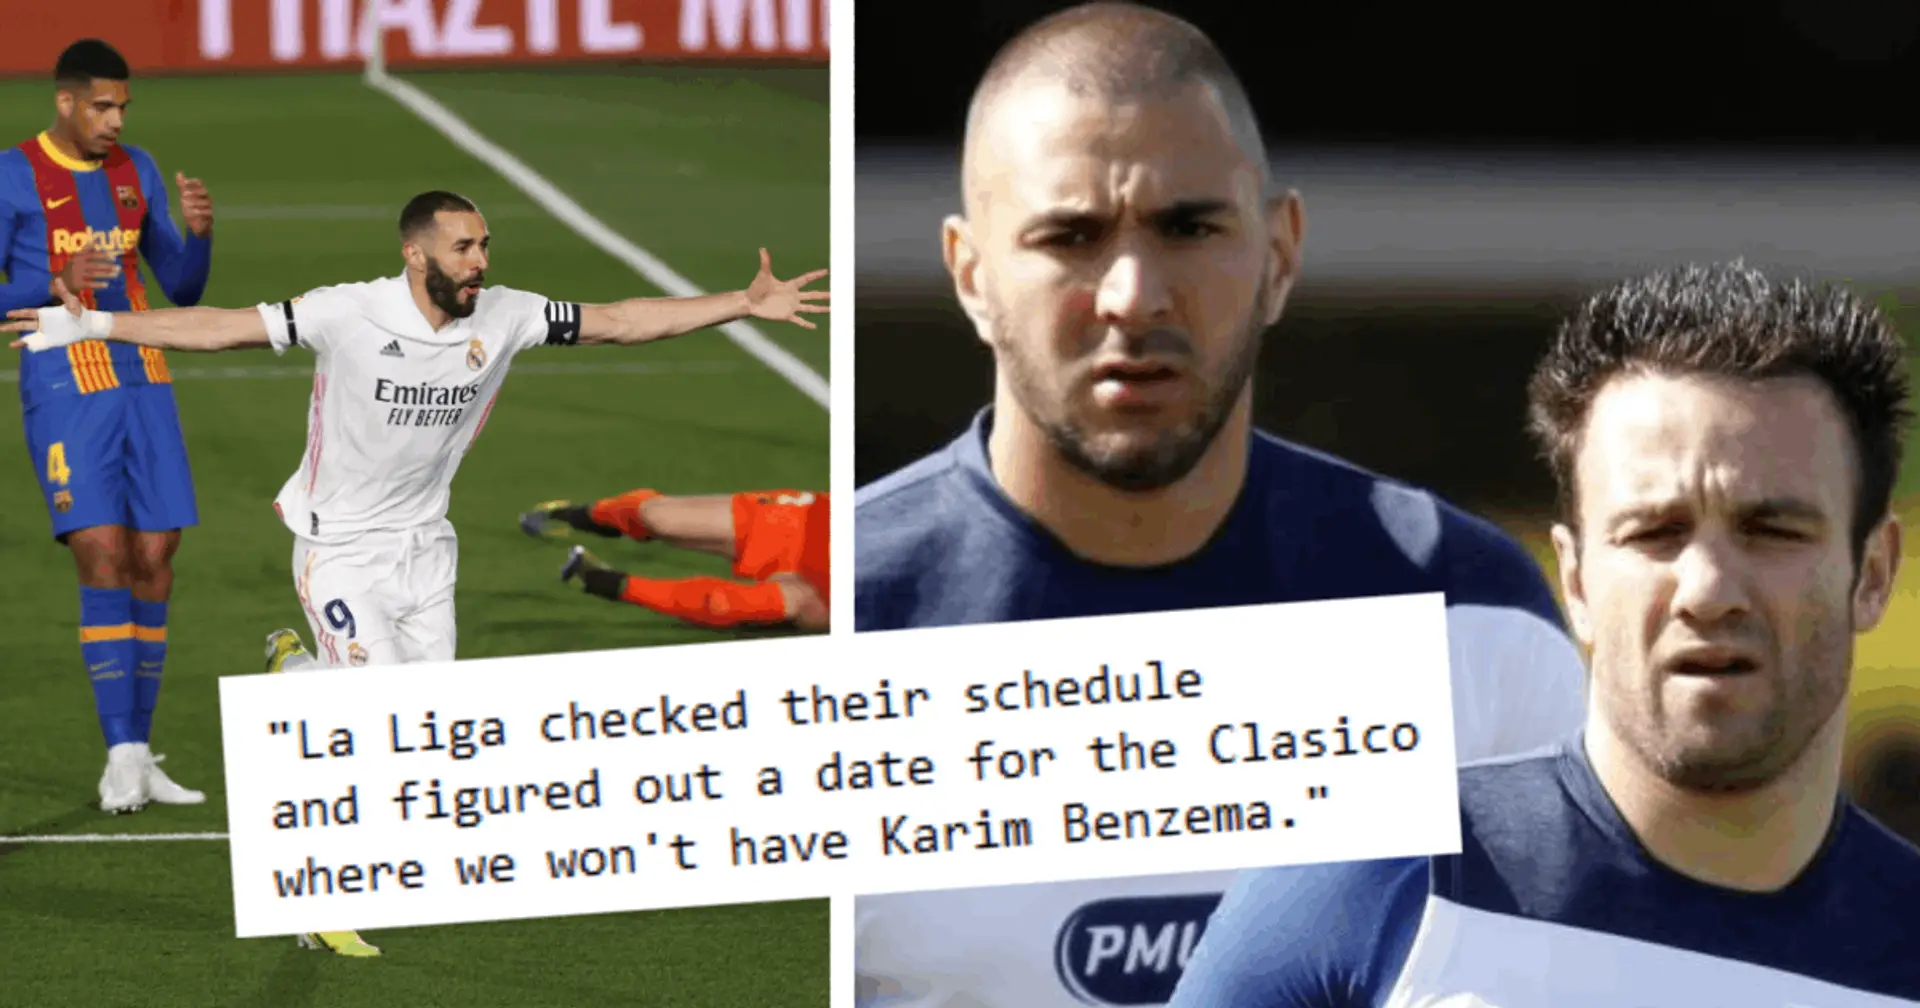 Will Karim Benzema really miss Clasico due to court trial? You asked - we answered